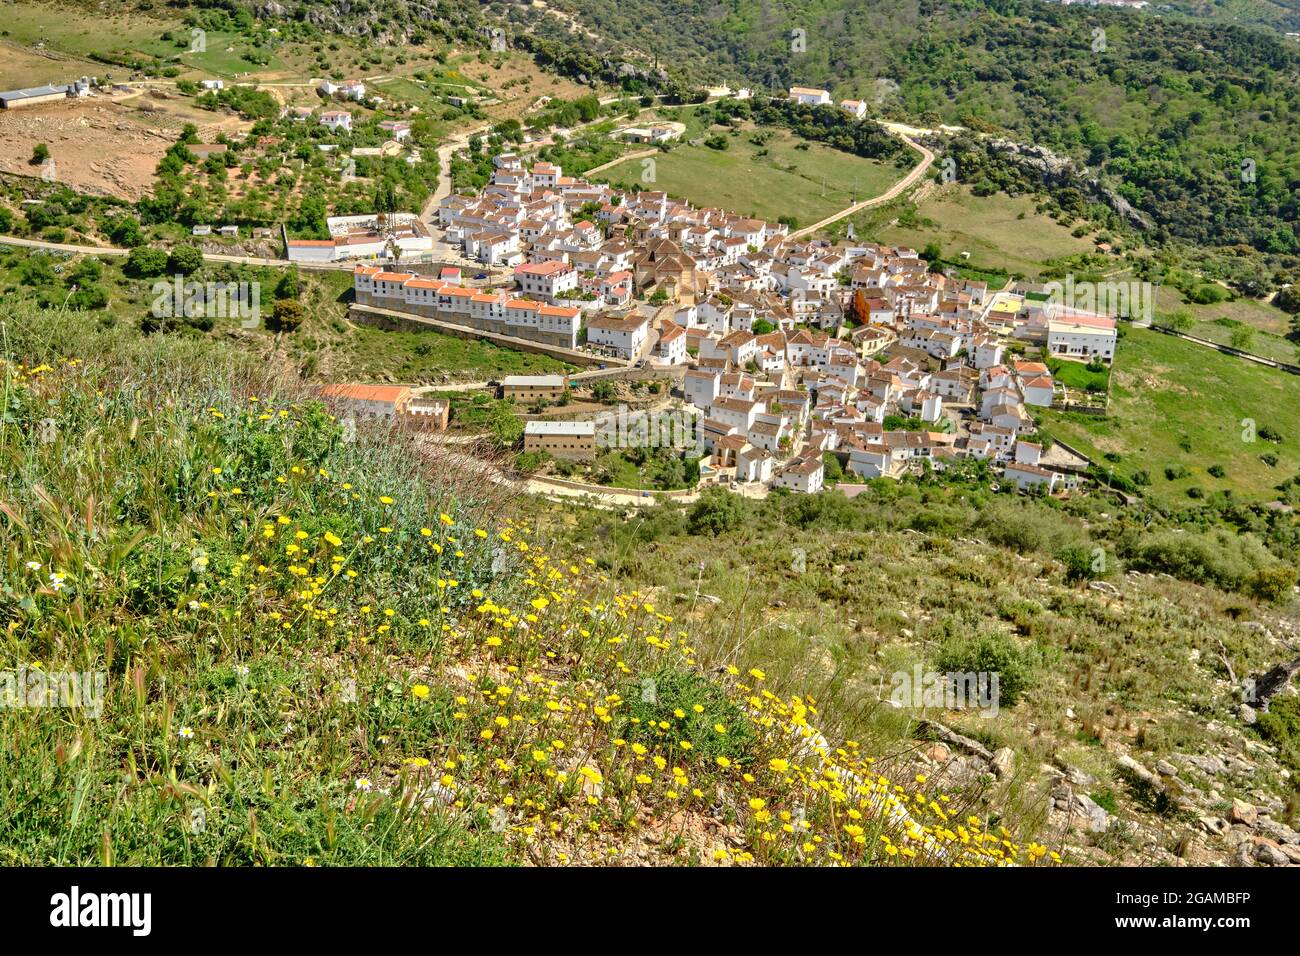 View of white village with yellow flowers in front, Alpandeire, Serrania de Ronda, Malaga province, Andalusia, Spain. Stock Photo